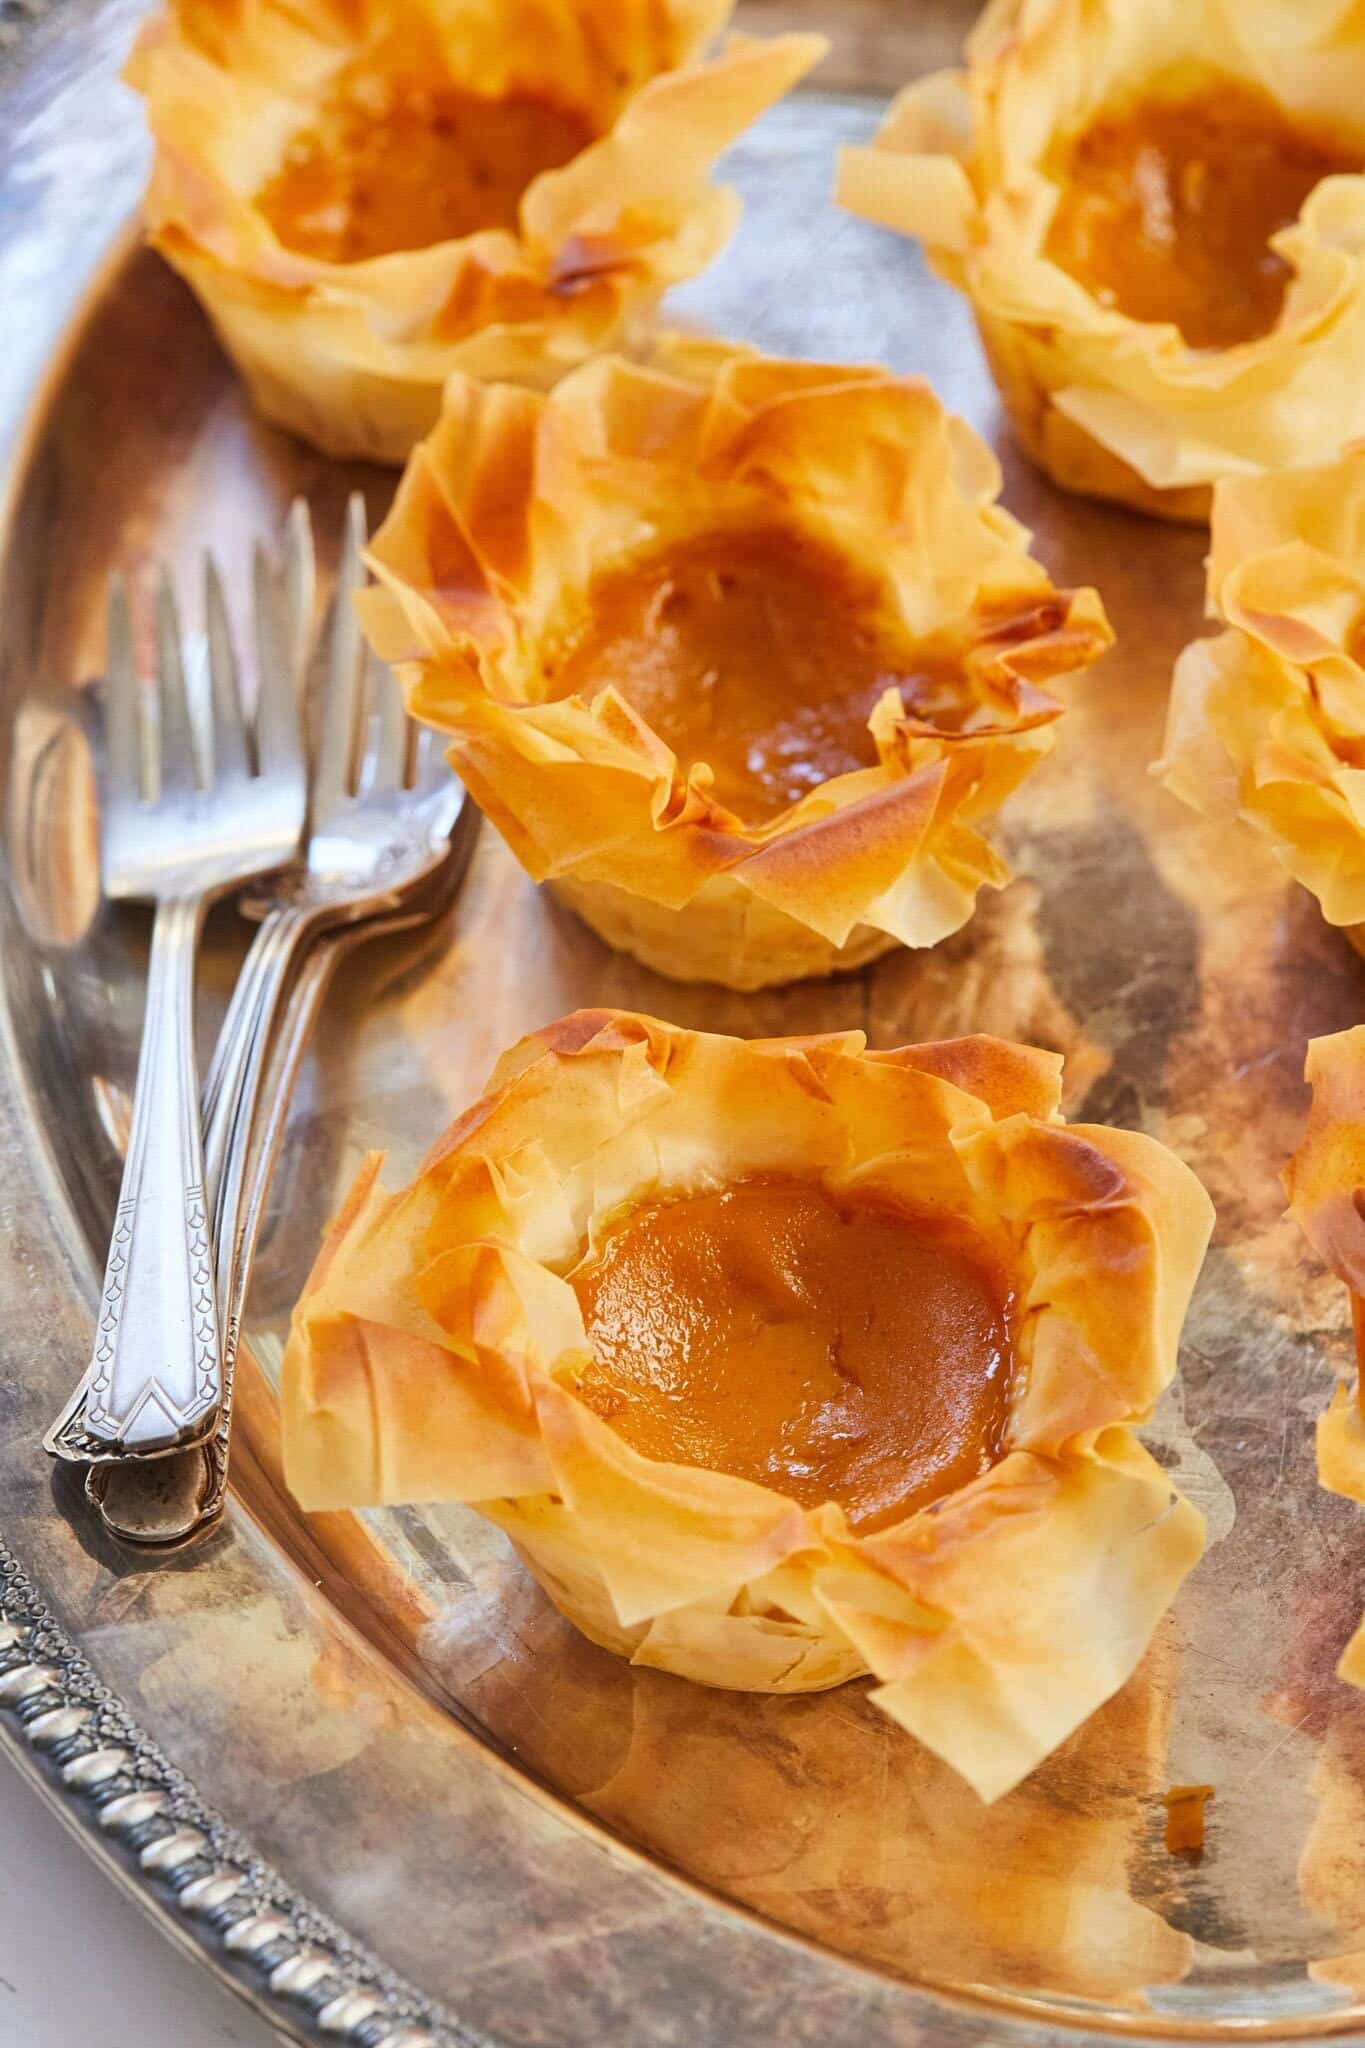 Petite Pumpkin Pies look gorgeous with golden crispy phyllo crust and golden orange silky smooth filling. They're served on a big silver pater with forks. 